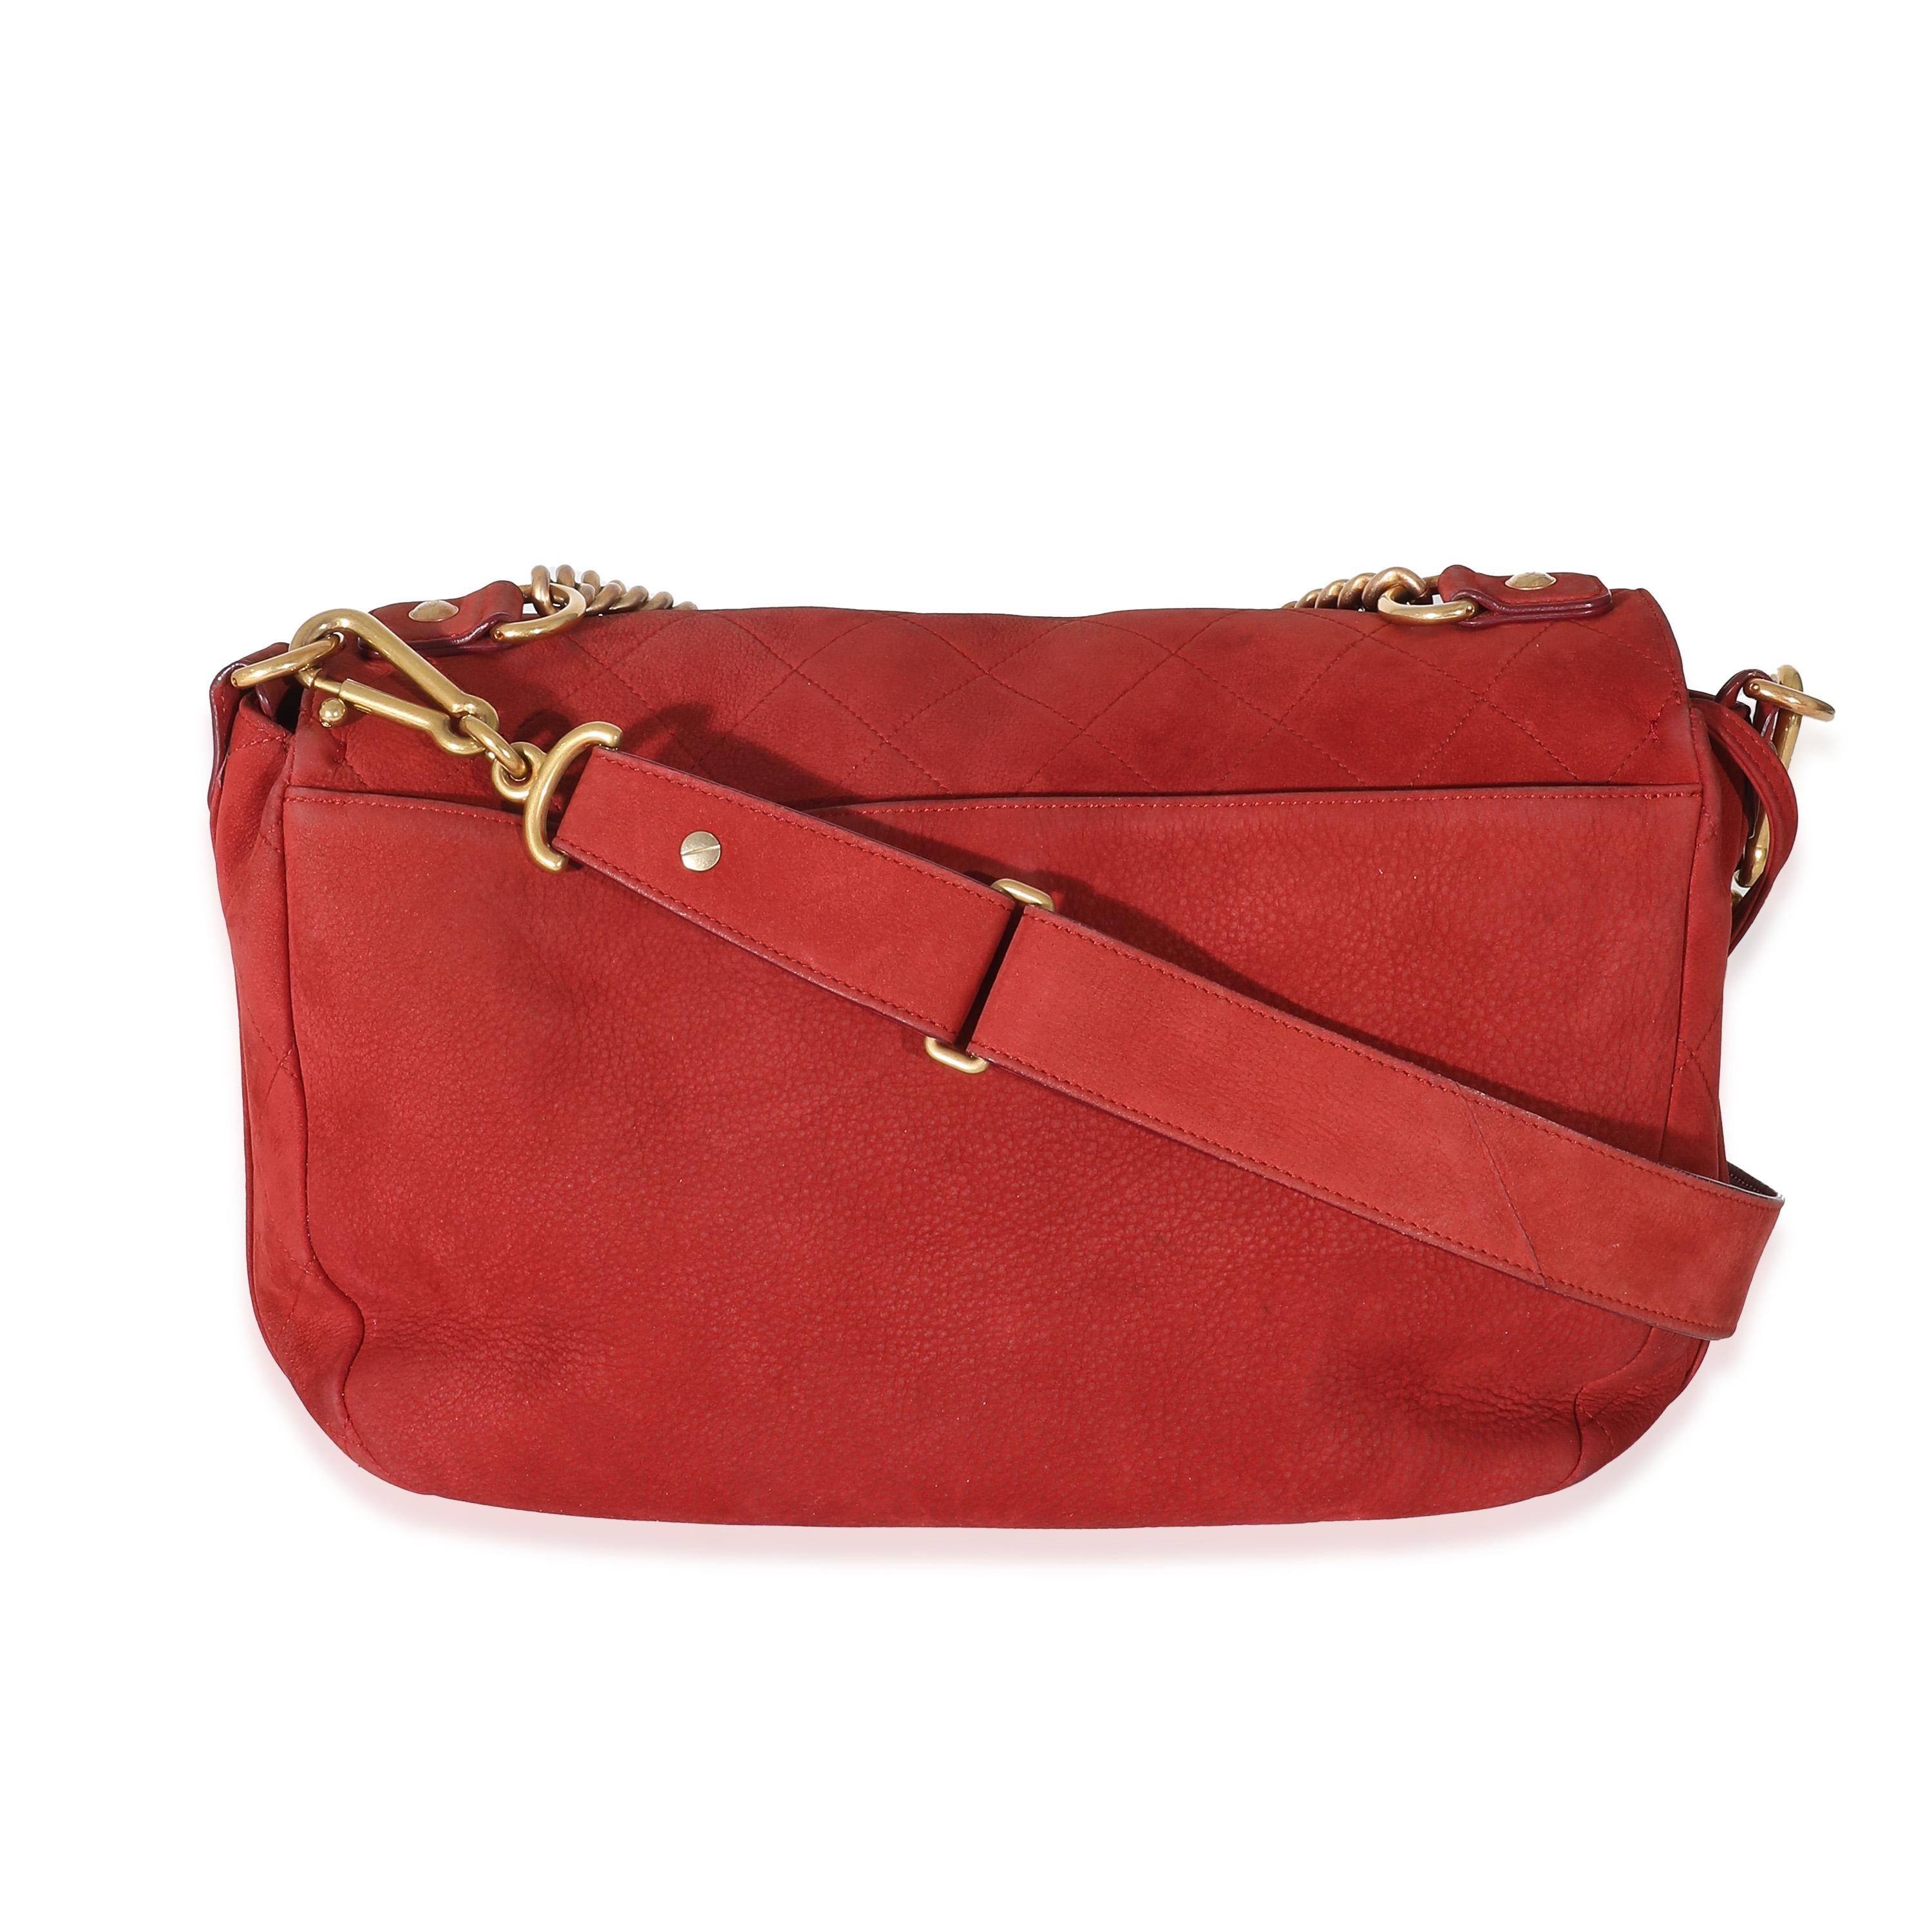 Listing Title: Chanel Red Suede Paris In Rome Messenger Bag
SKU: 133281
MSRP: 4000.00 USD
Condition: Pre-owned 
Handbag Condition: Very Good
Condition Comments: Item is in very good condition with minor signs of wear. Exterior heavy scuffing and